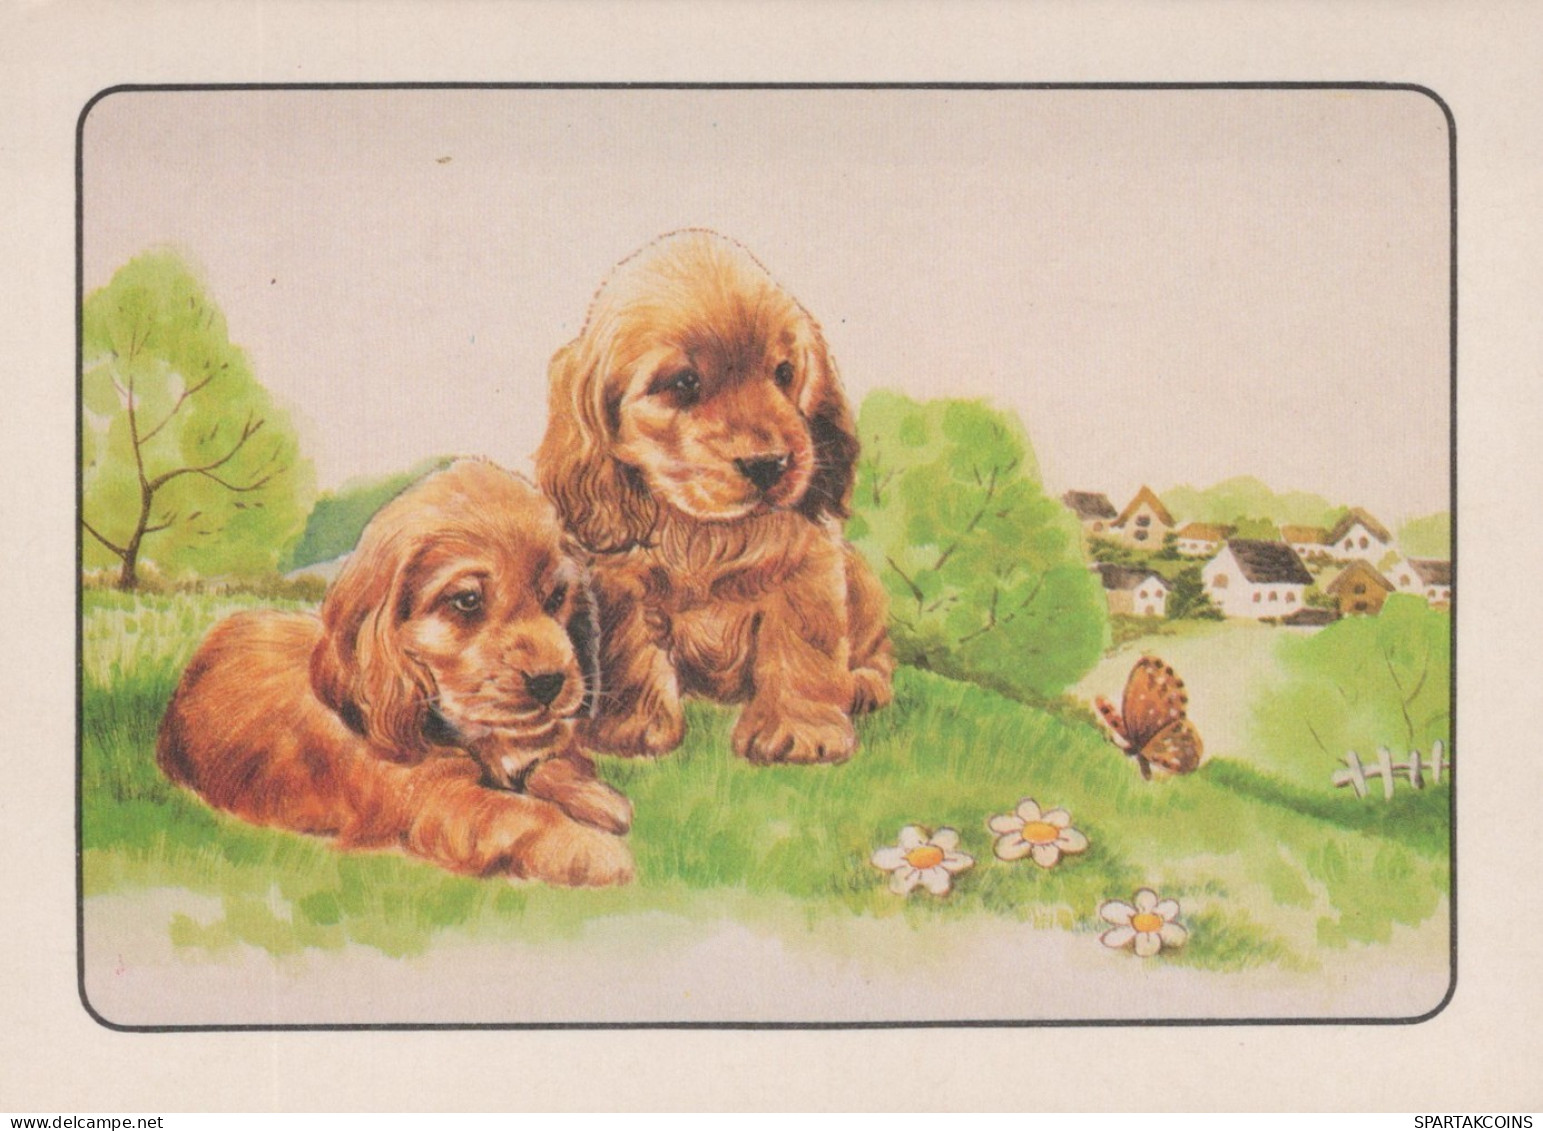 CANE Animale Vintage Cartolina CPSM #PAN544.A - Chiens